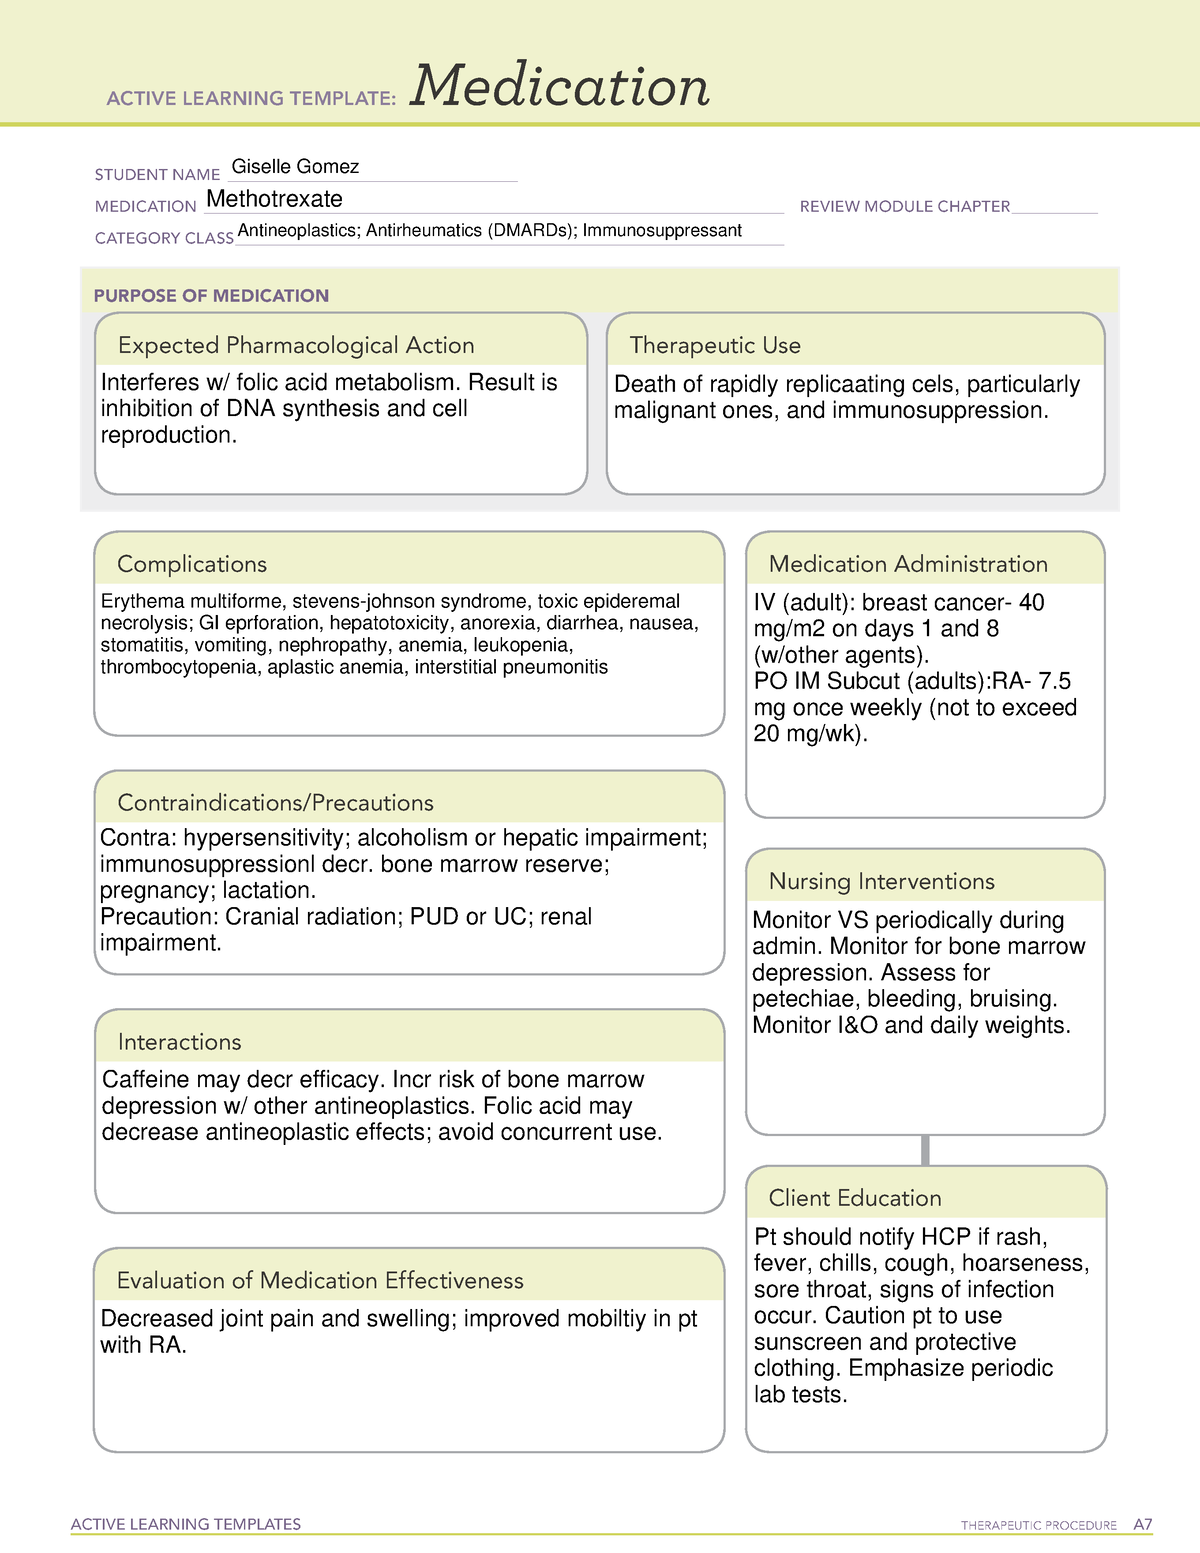 ati-medication-template-methotrexate-active-learning-templates-therapeutic-procedure-a